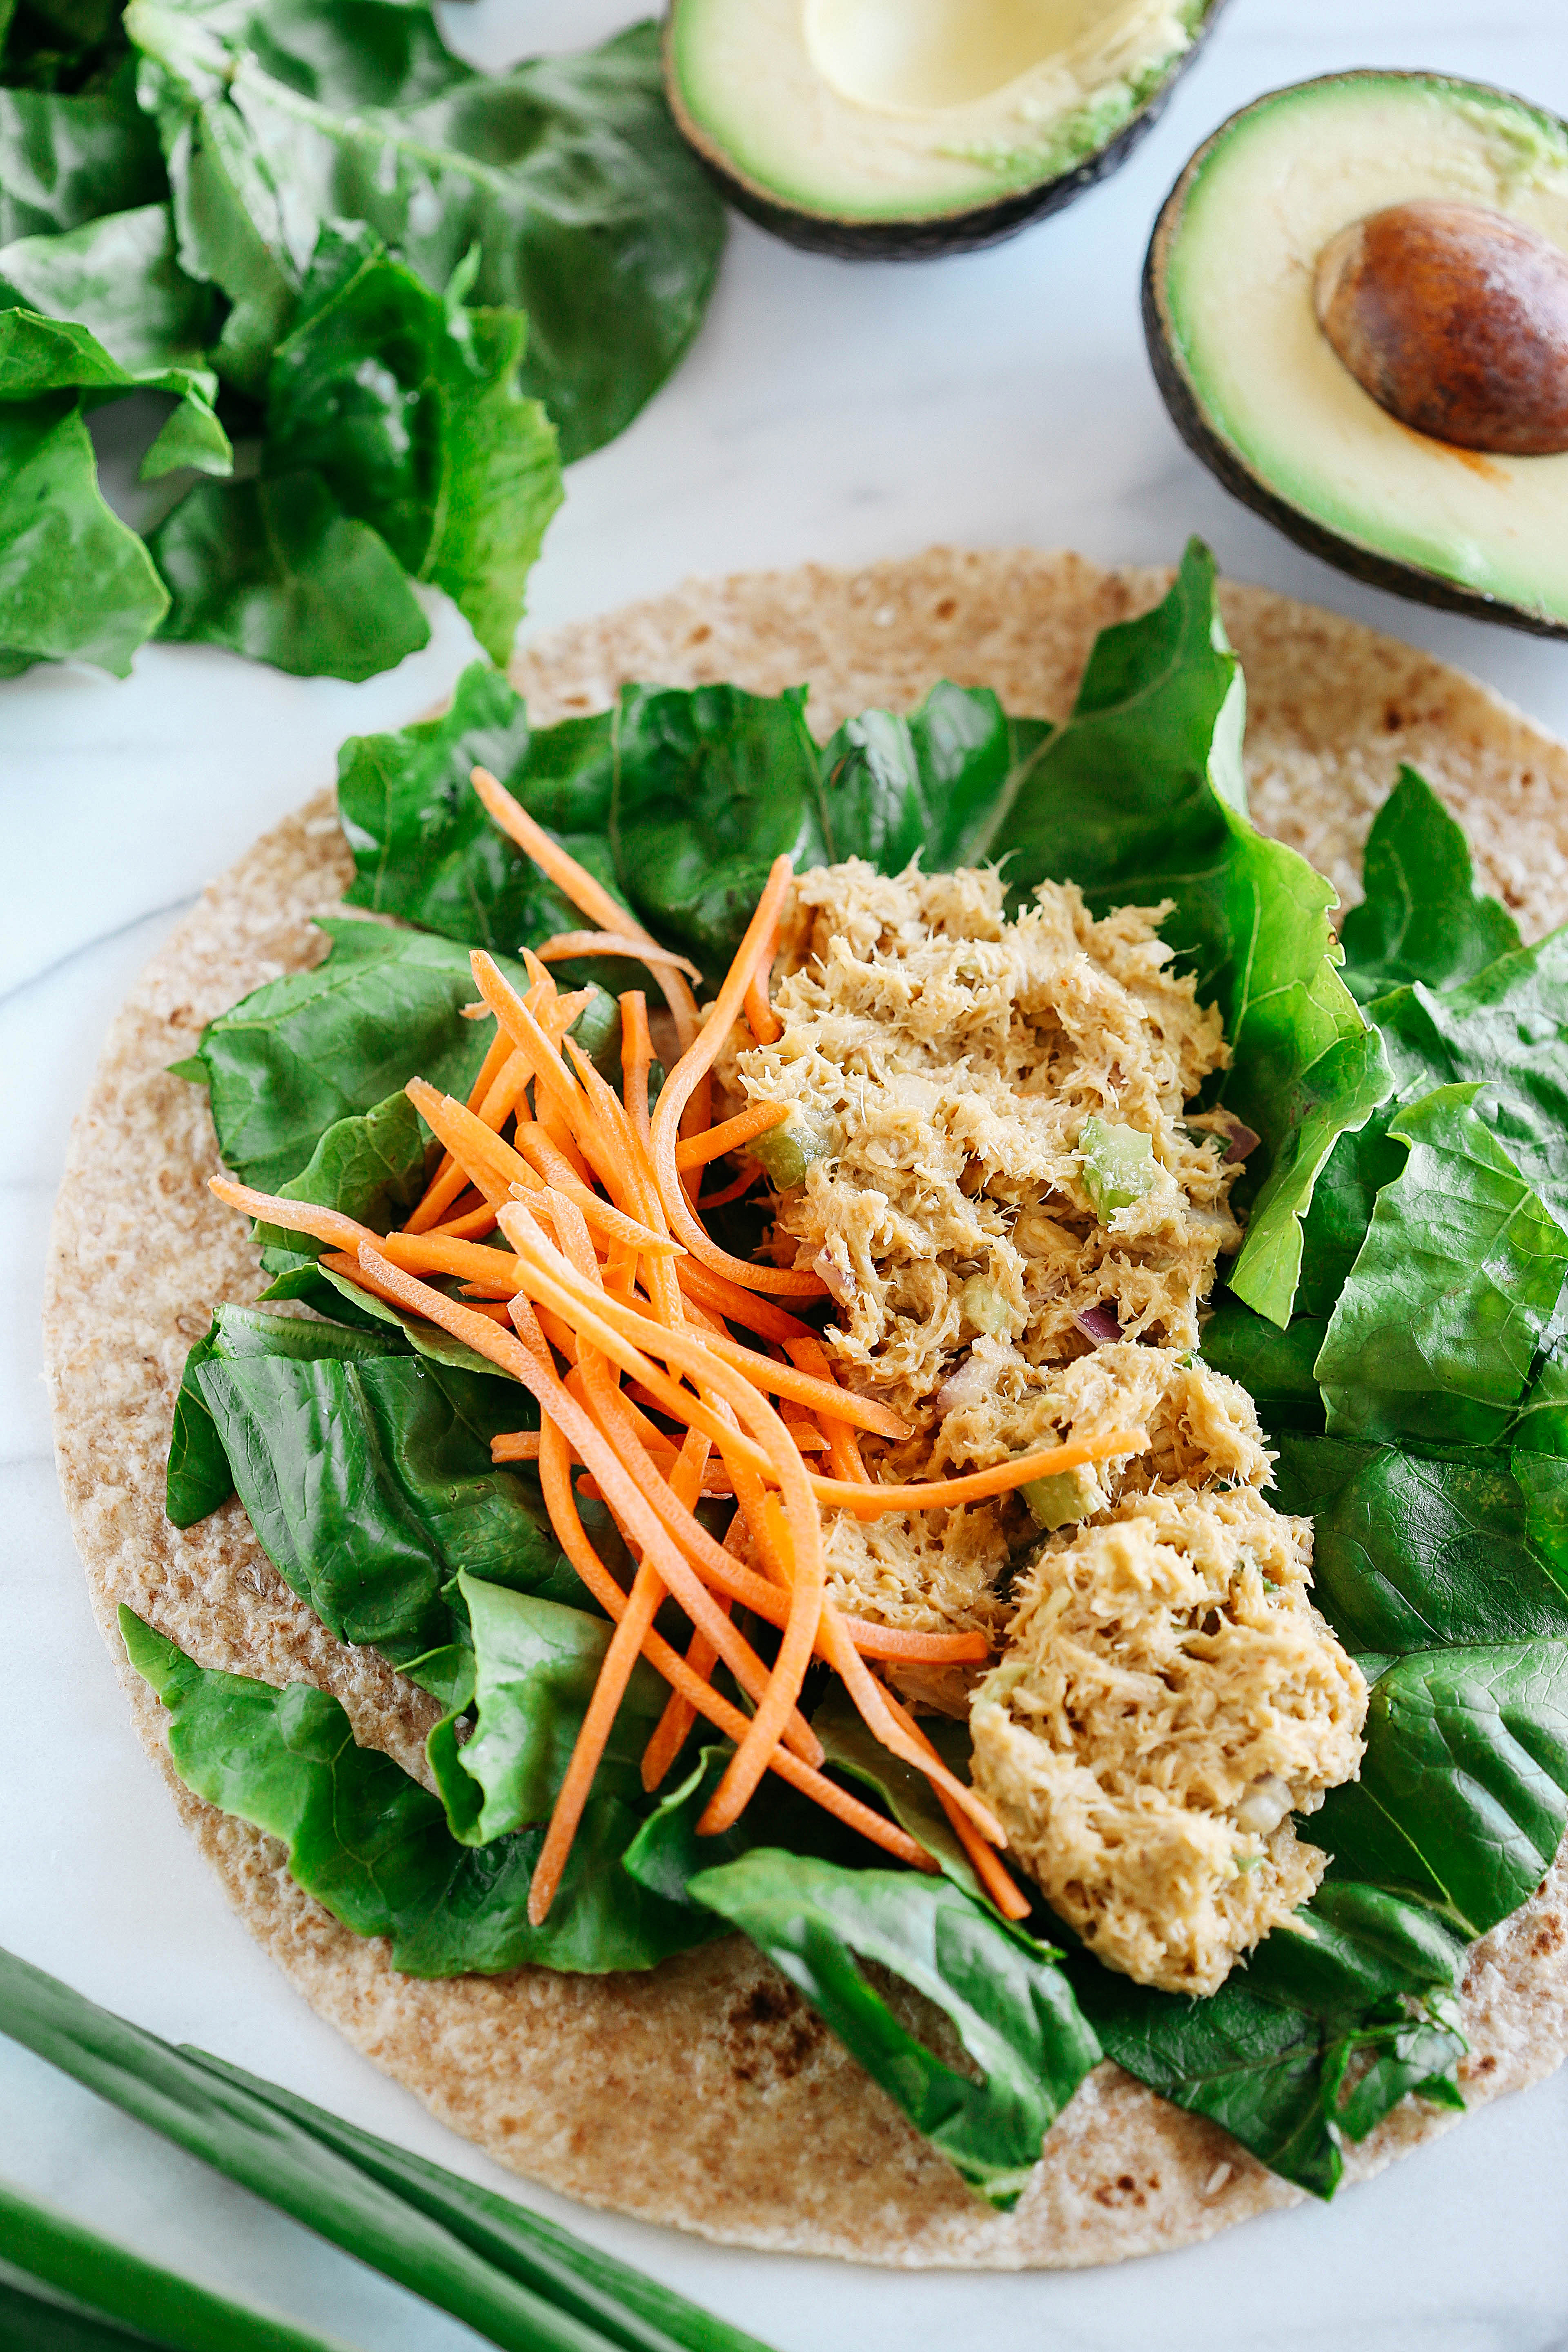 These Spicy Tuna Avocado Wraps are light and fresh, full of flavor and only take 5 minutes to make! The perfect healthy lunch for a busy work week!